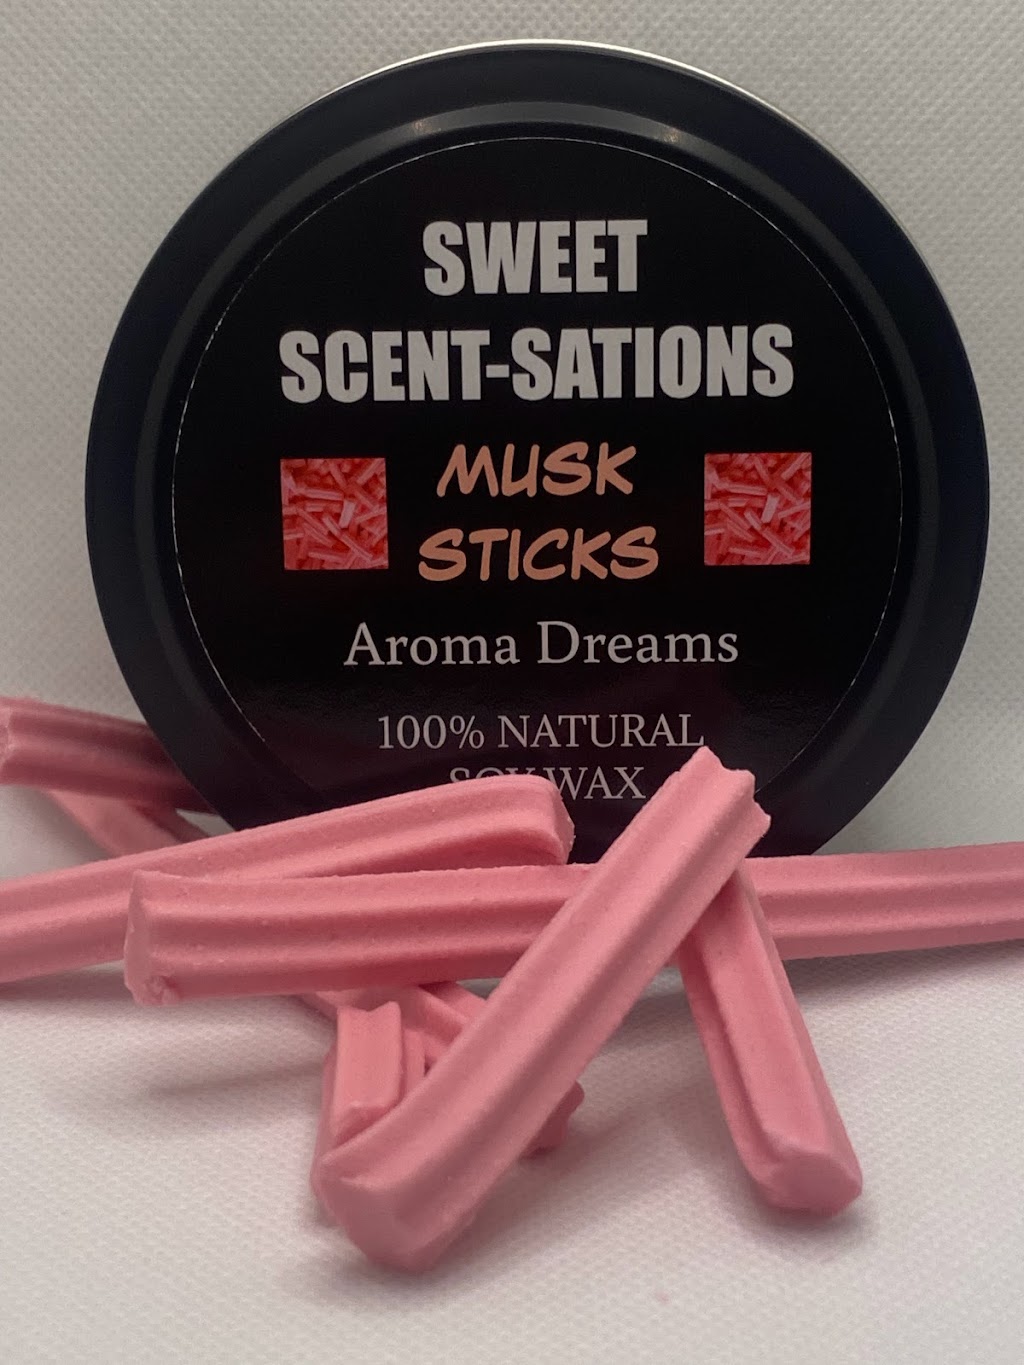 Aroma Dreams Batemans Bay - candles & gifts | 37 Litchfield Cres, Long Beach NSW 2536, Australia | Phone: 0423 605 715